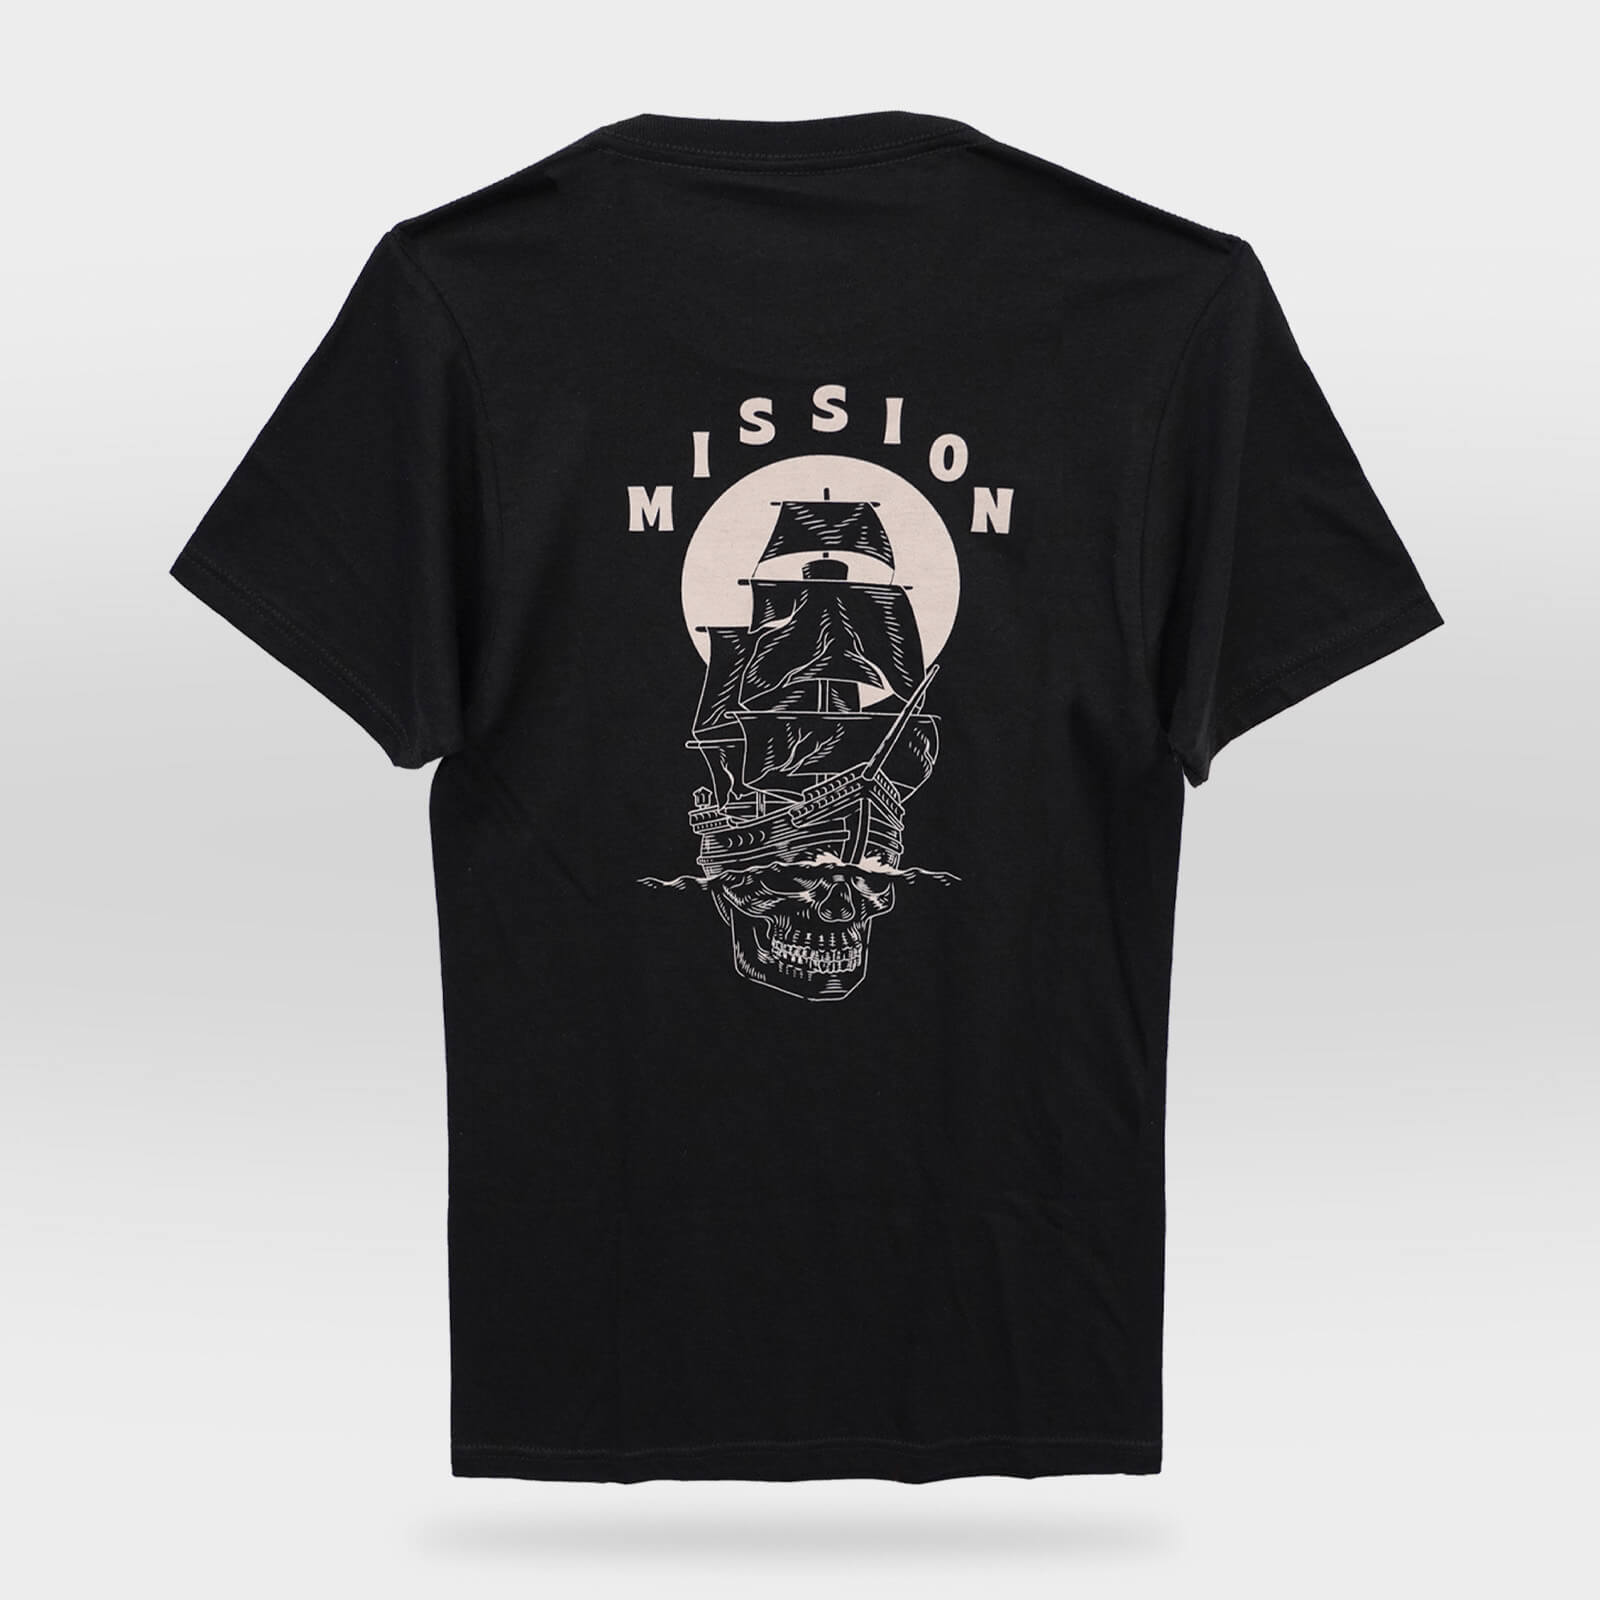 Jolly roger tee from MISSION